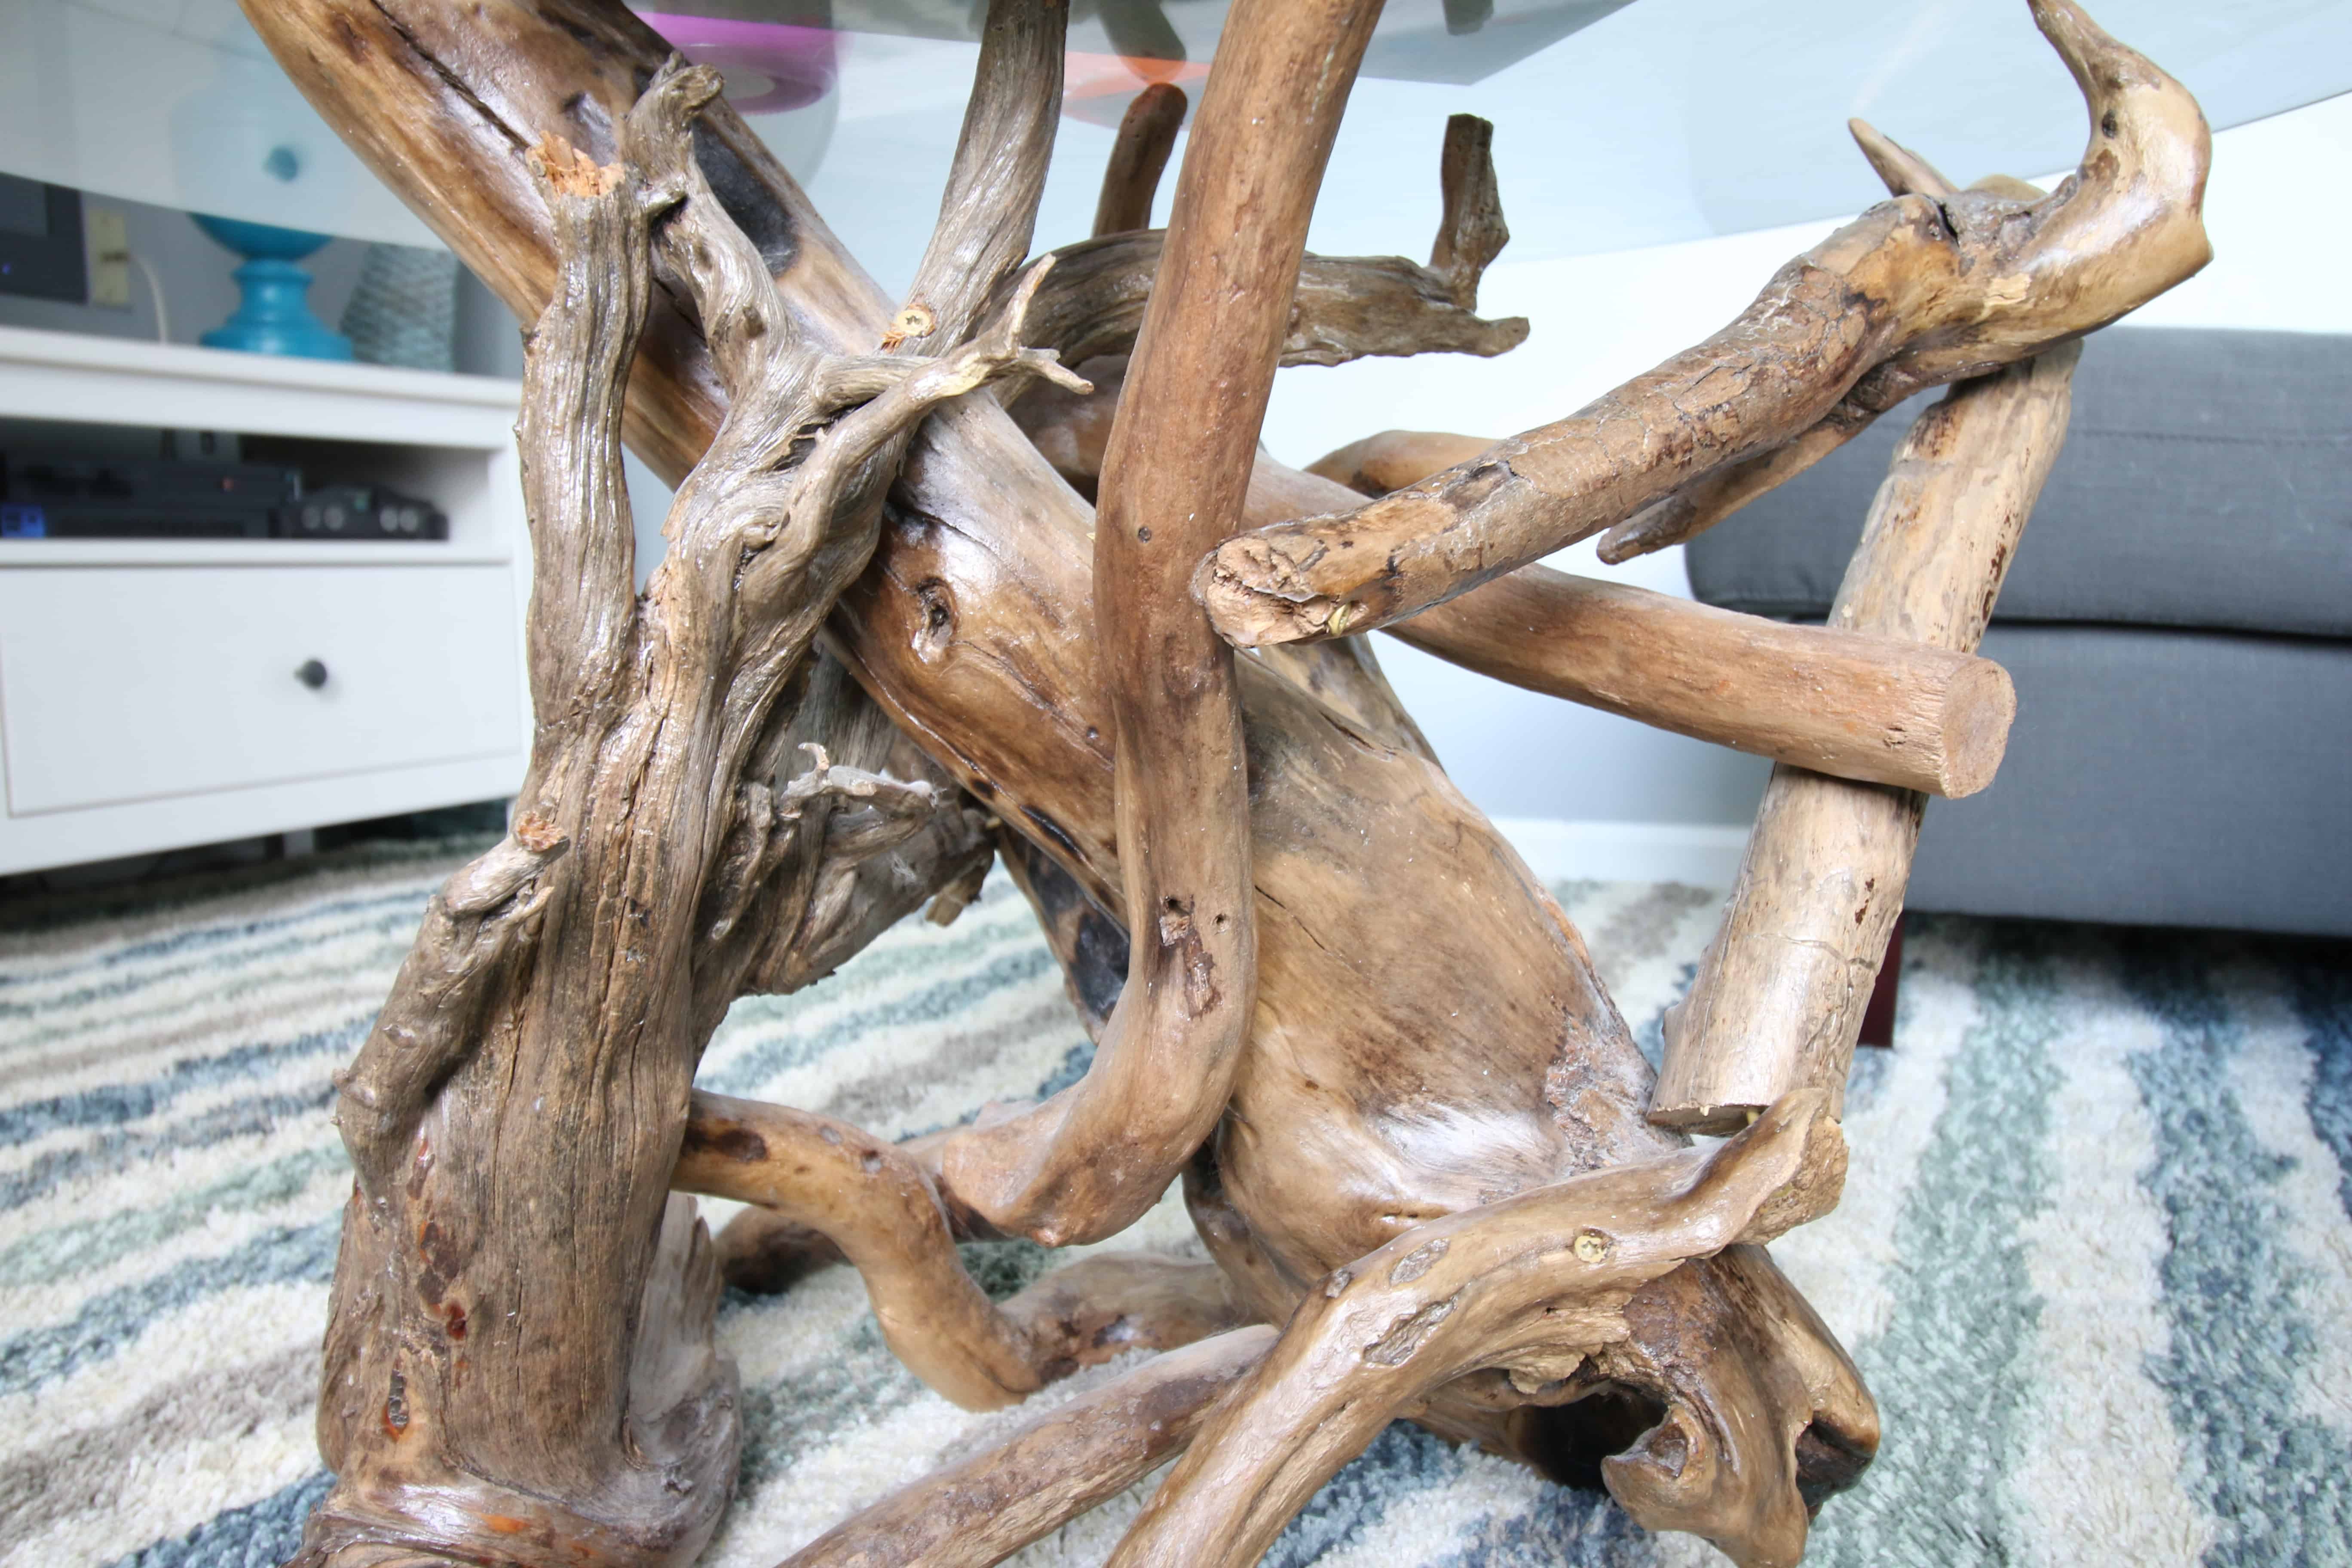 How To Make A Diy Driftwood Coffee Table, How To Make A Coffee Table Out Of Driftwood